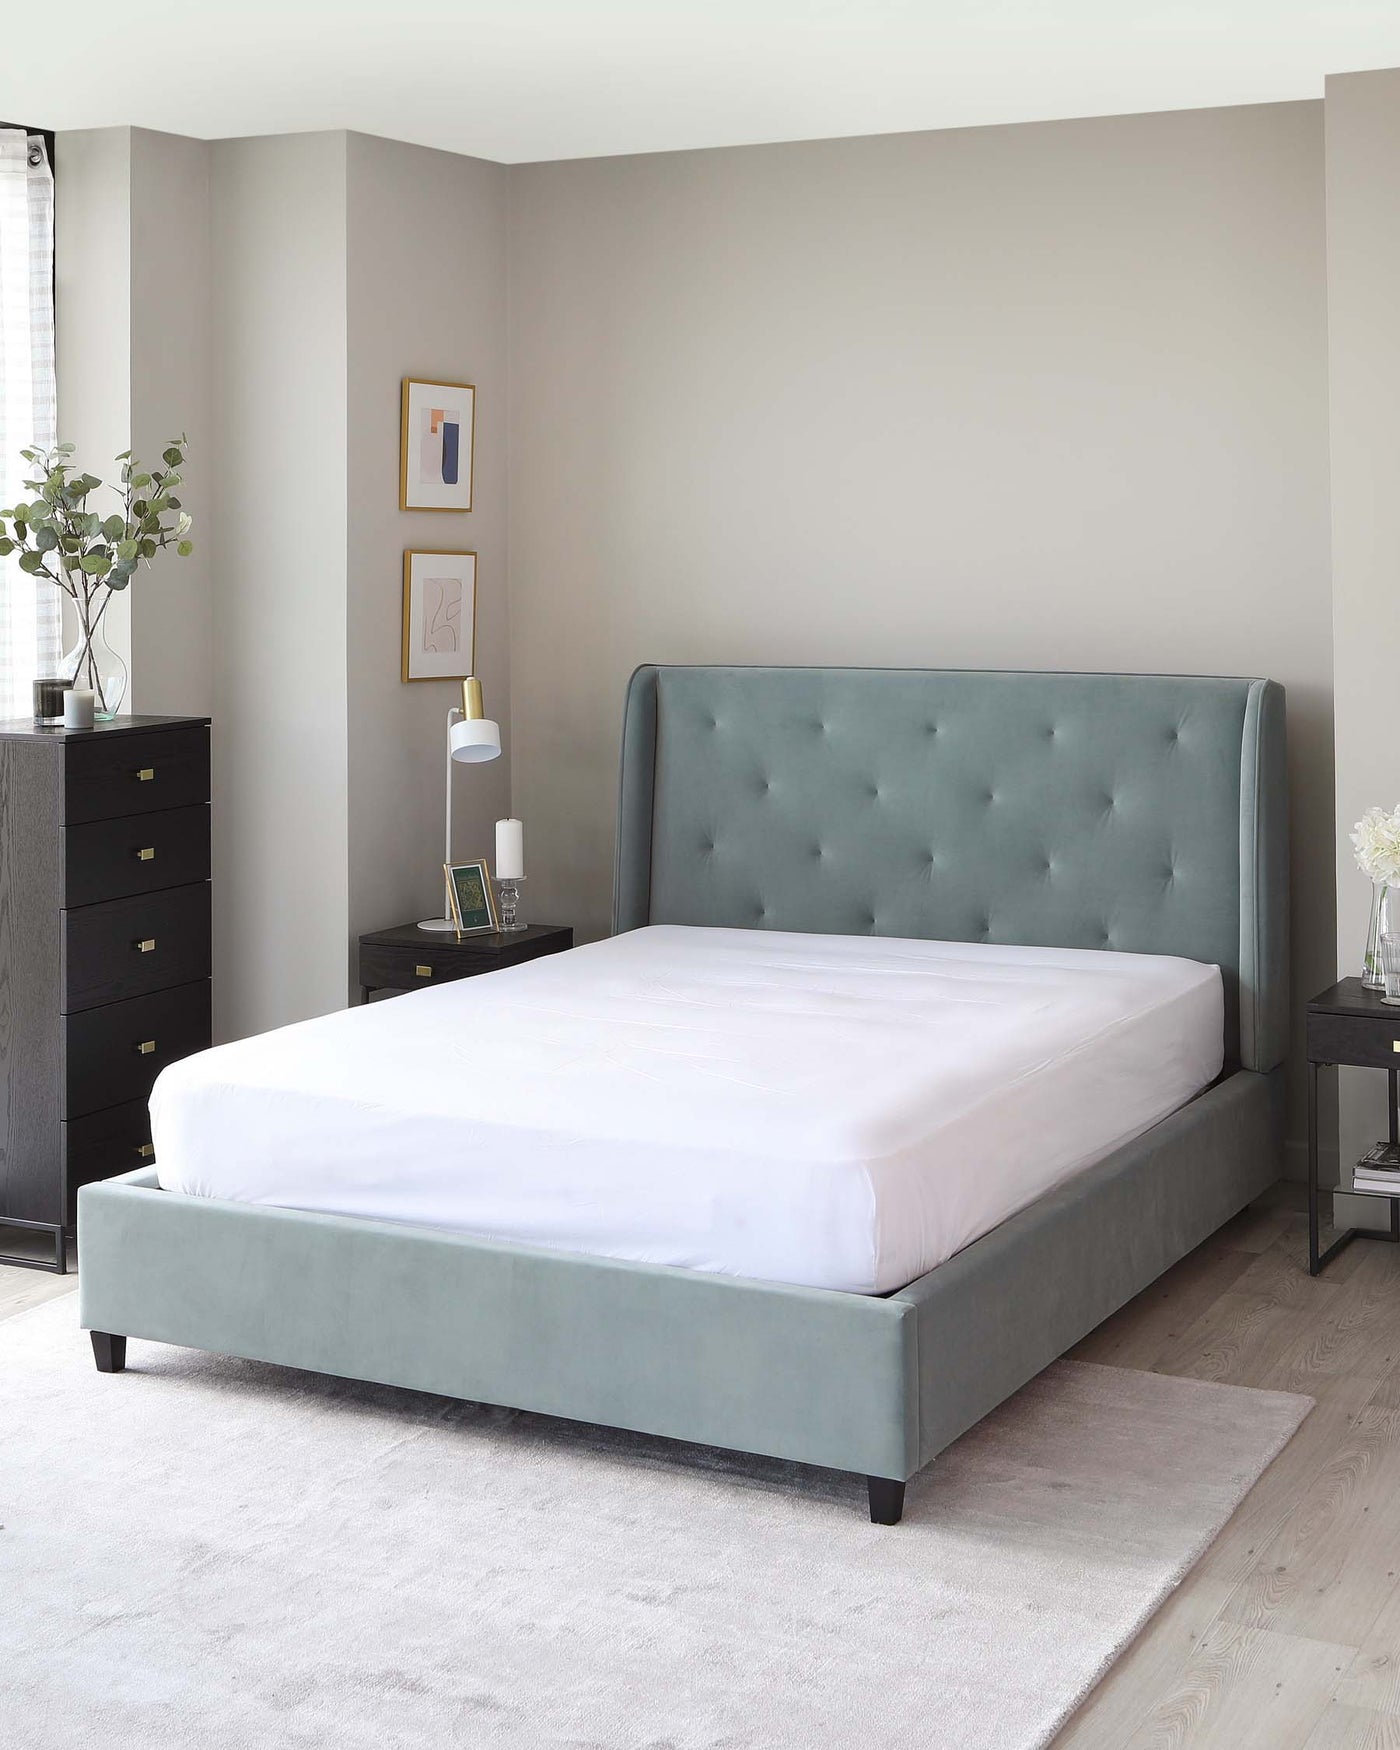 A contemporary bedroom featuring a grey upholstered bed with a tufted headboard, next to a matching grey nightstand with black accents, and a sleek black drawer dresser. The room is completed with minimalist decor and a soft grey area rug.